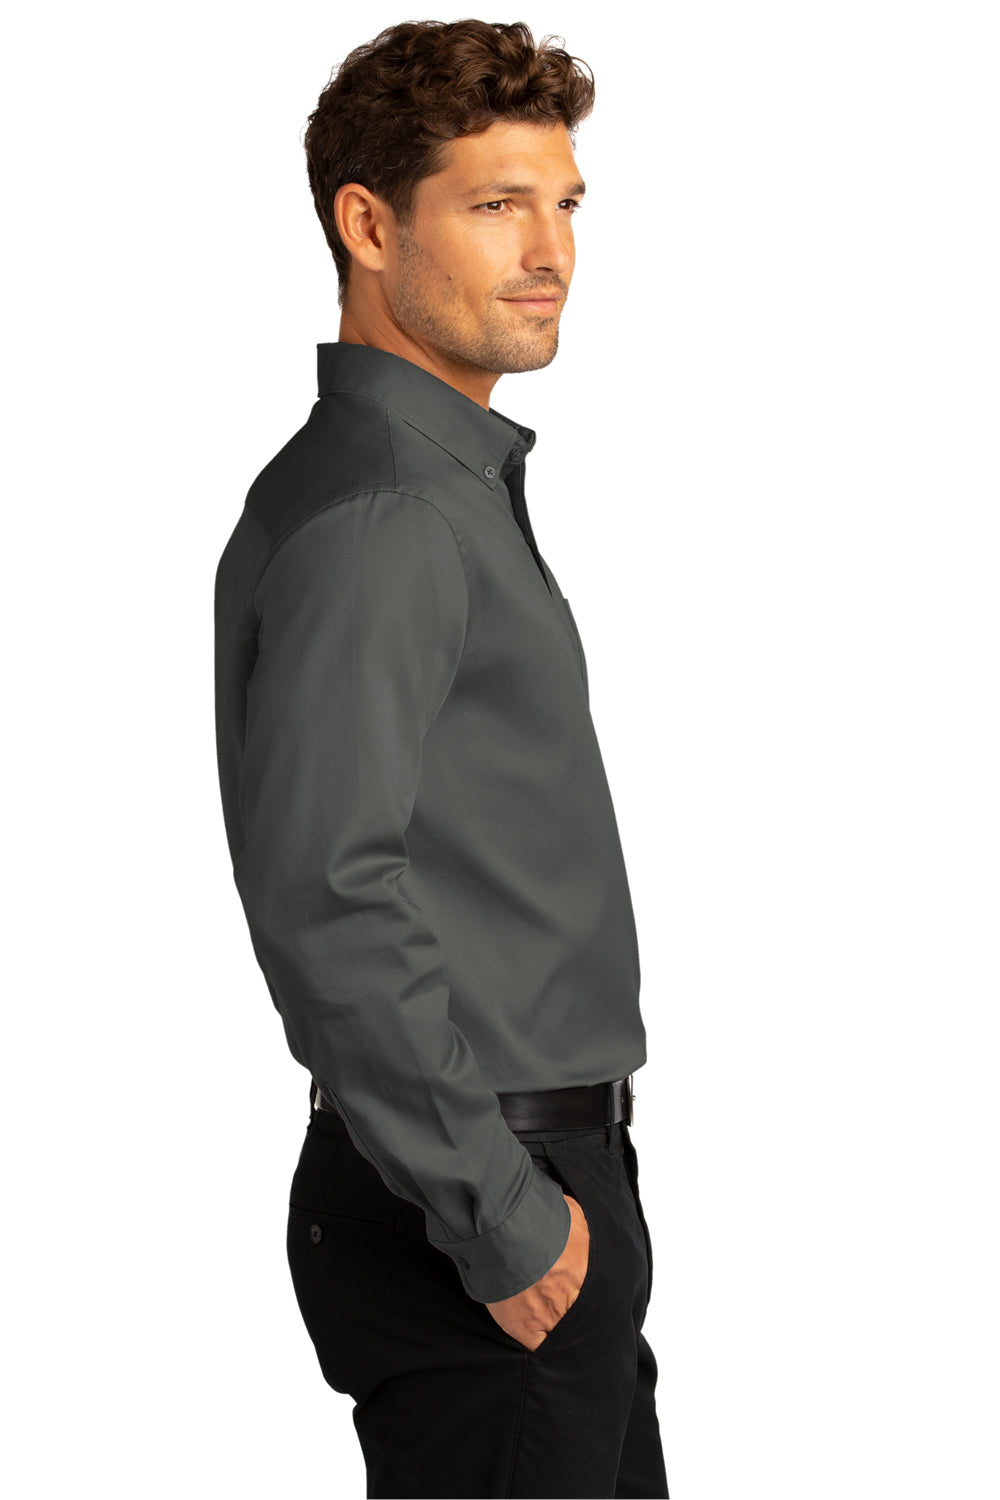 Port Authority Mens SuperPro Wrinkle Resistant React Long Sleeve Button Down Shirt w/ Pocket Storm Grey Side